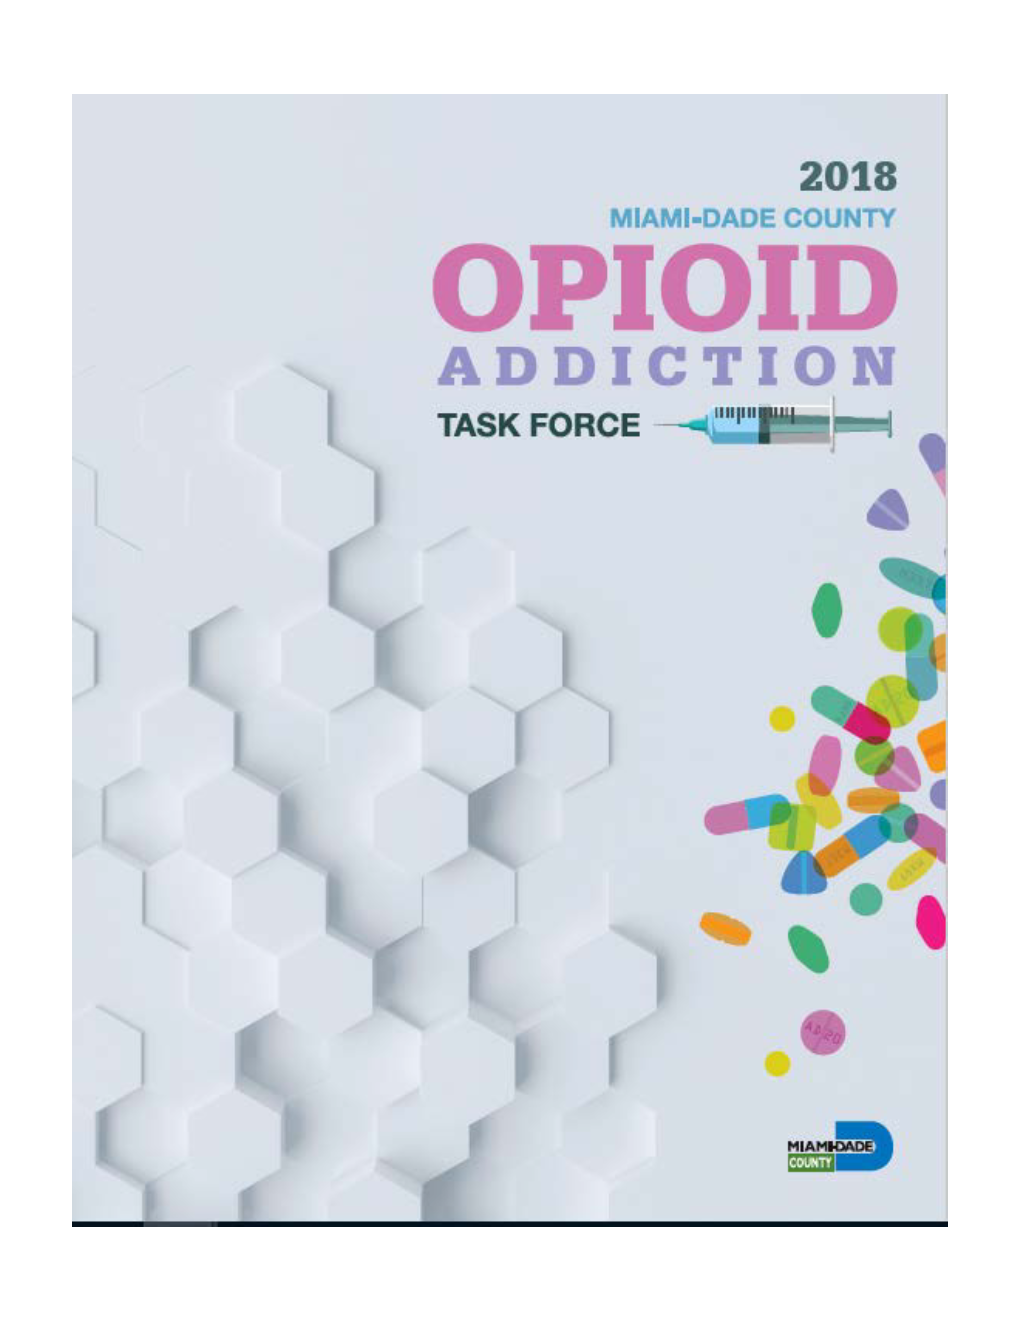 Miami-Dade County Opioid Addiction Task Force Implementation Report